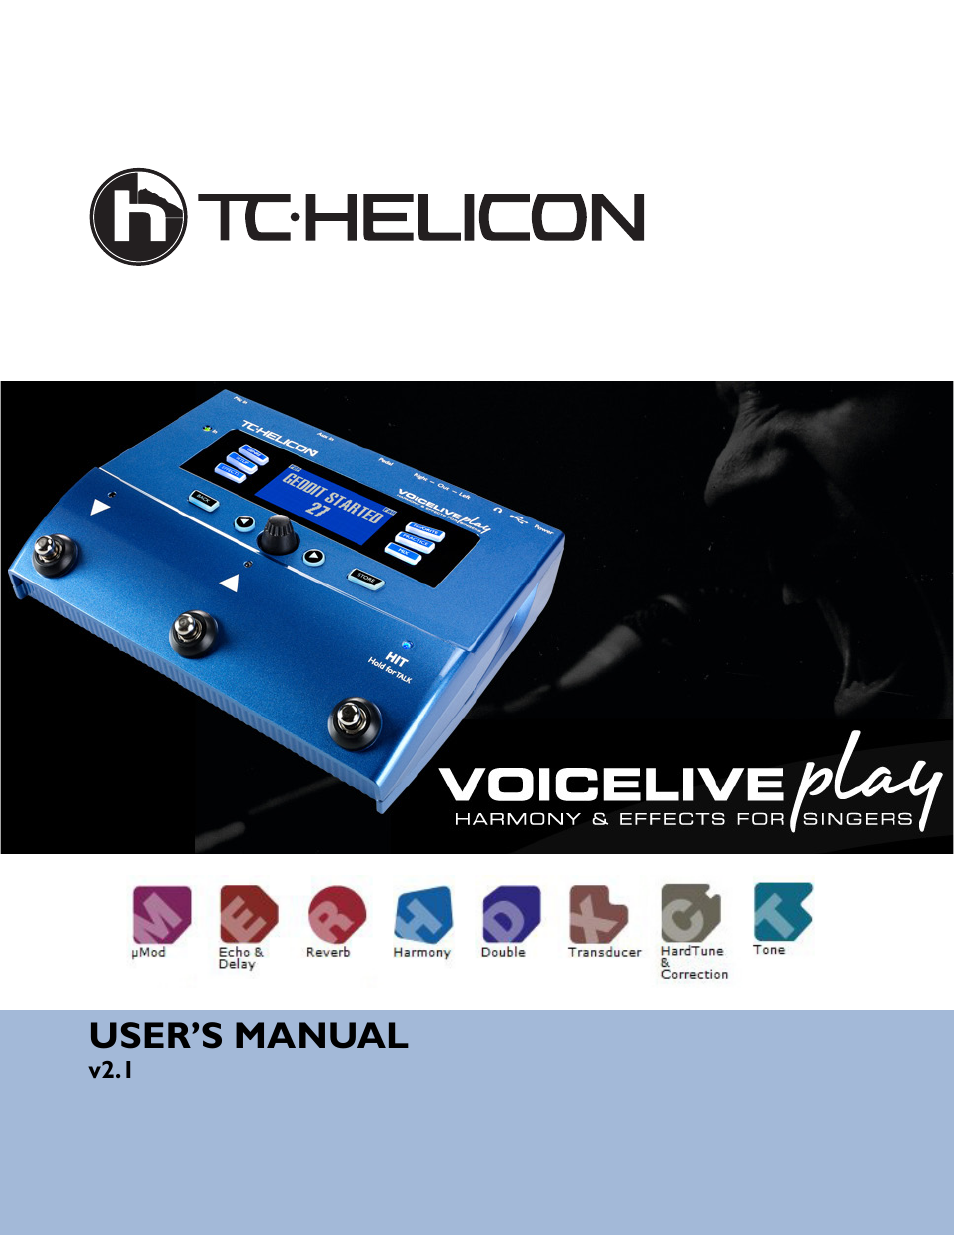 Tc Helicon Voicelive Play Details Manual User Manual 32 Pages